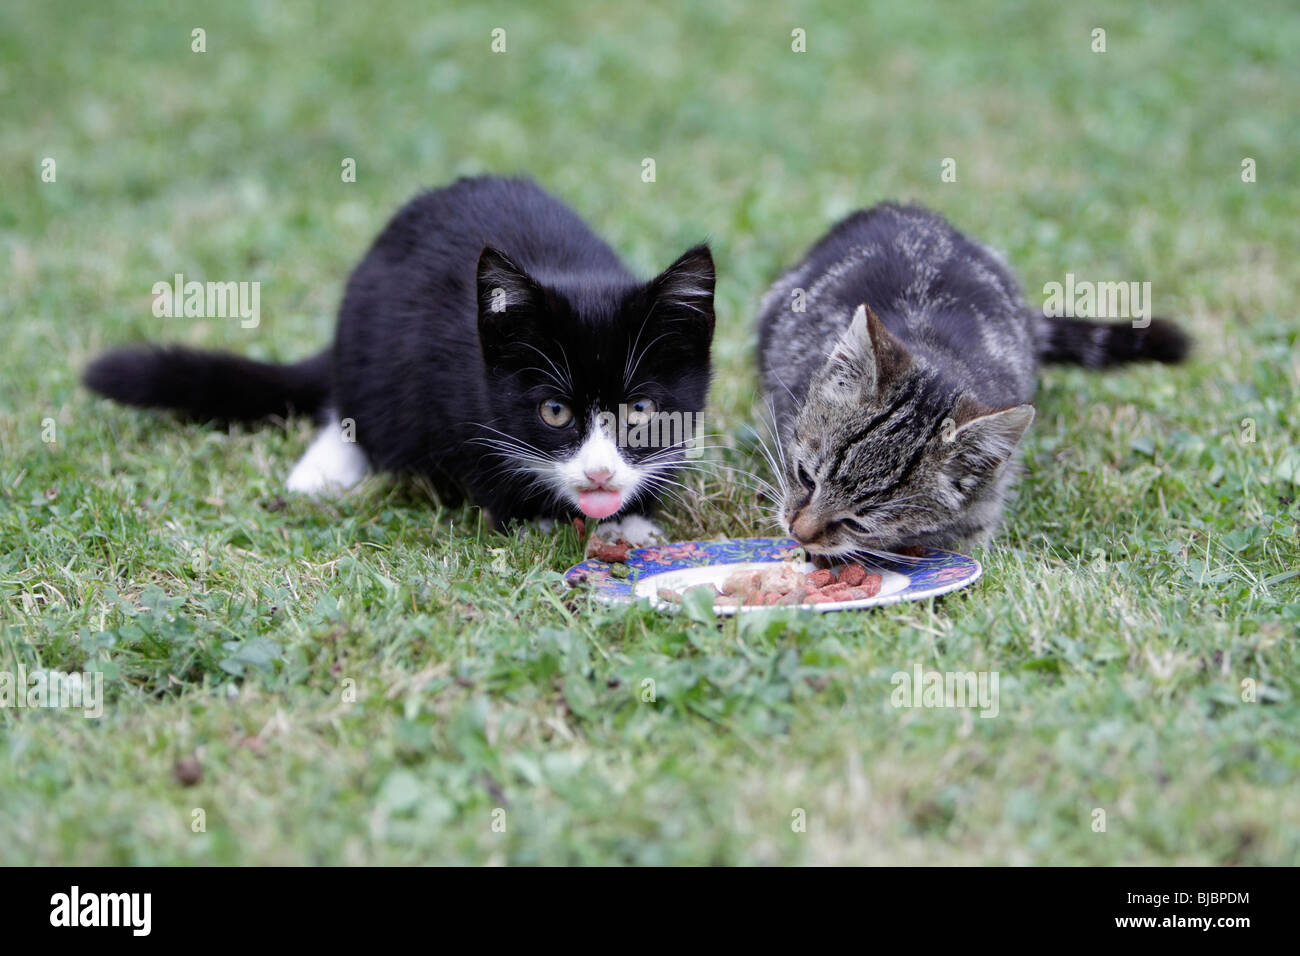 Cat, two young kittens, feeding from plate in garden Stock Photo